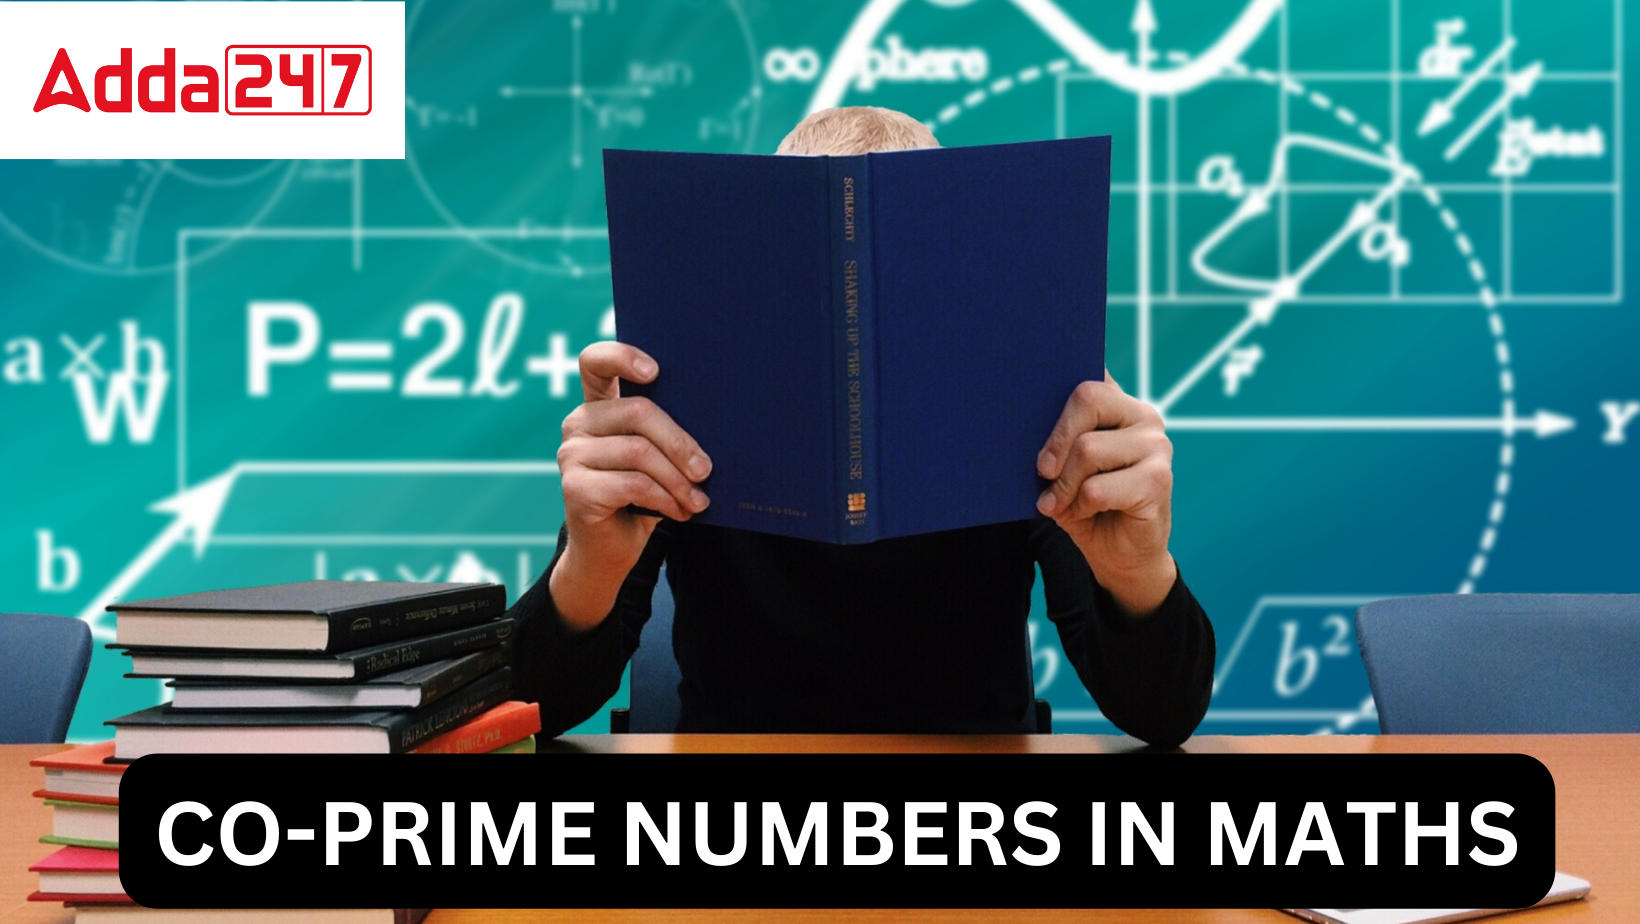 CO-PRIME NUMBERS IN MATHS